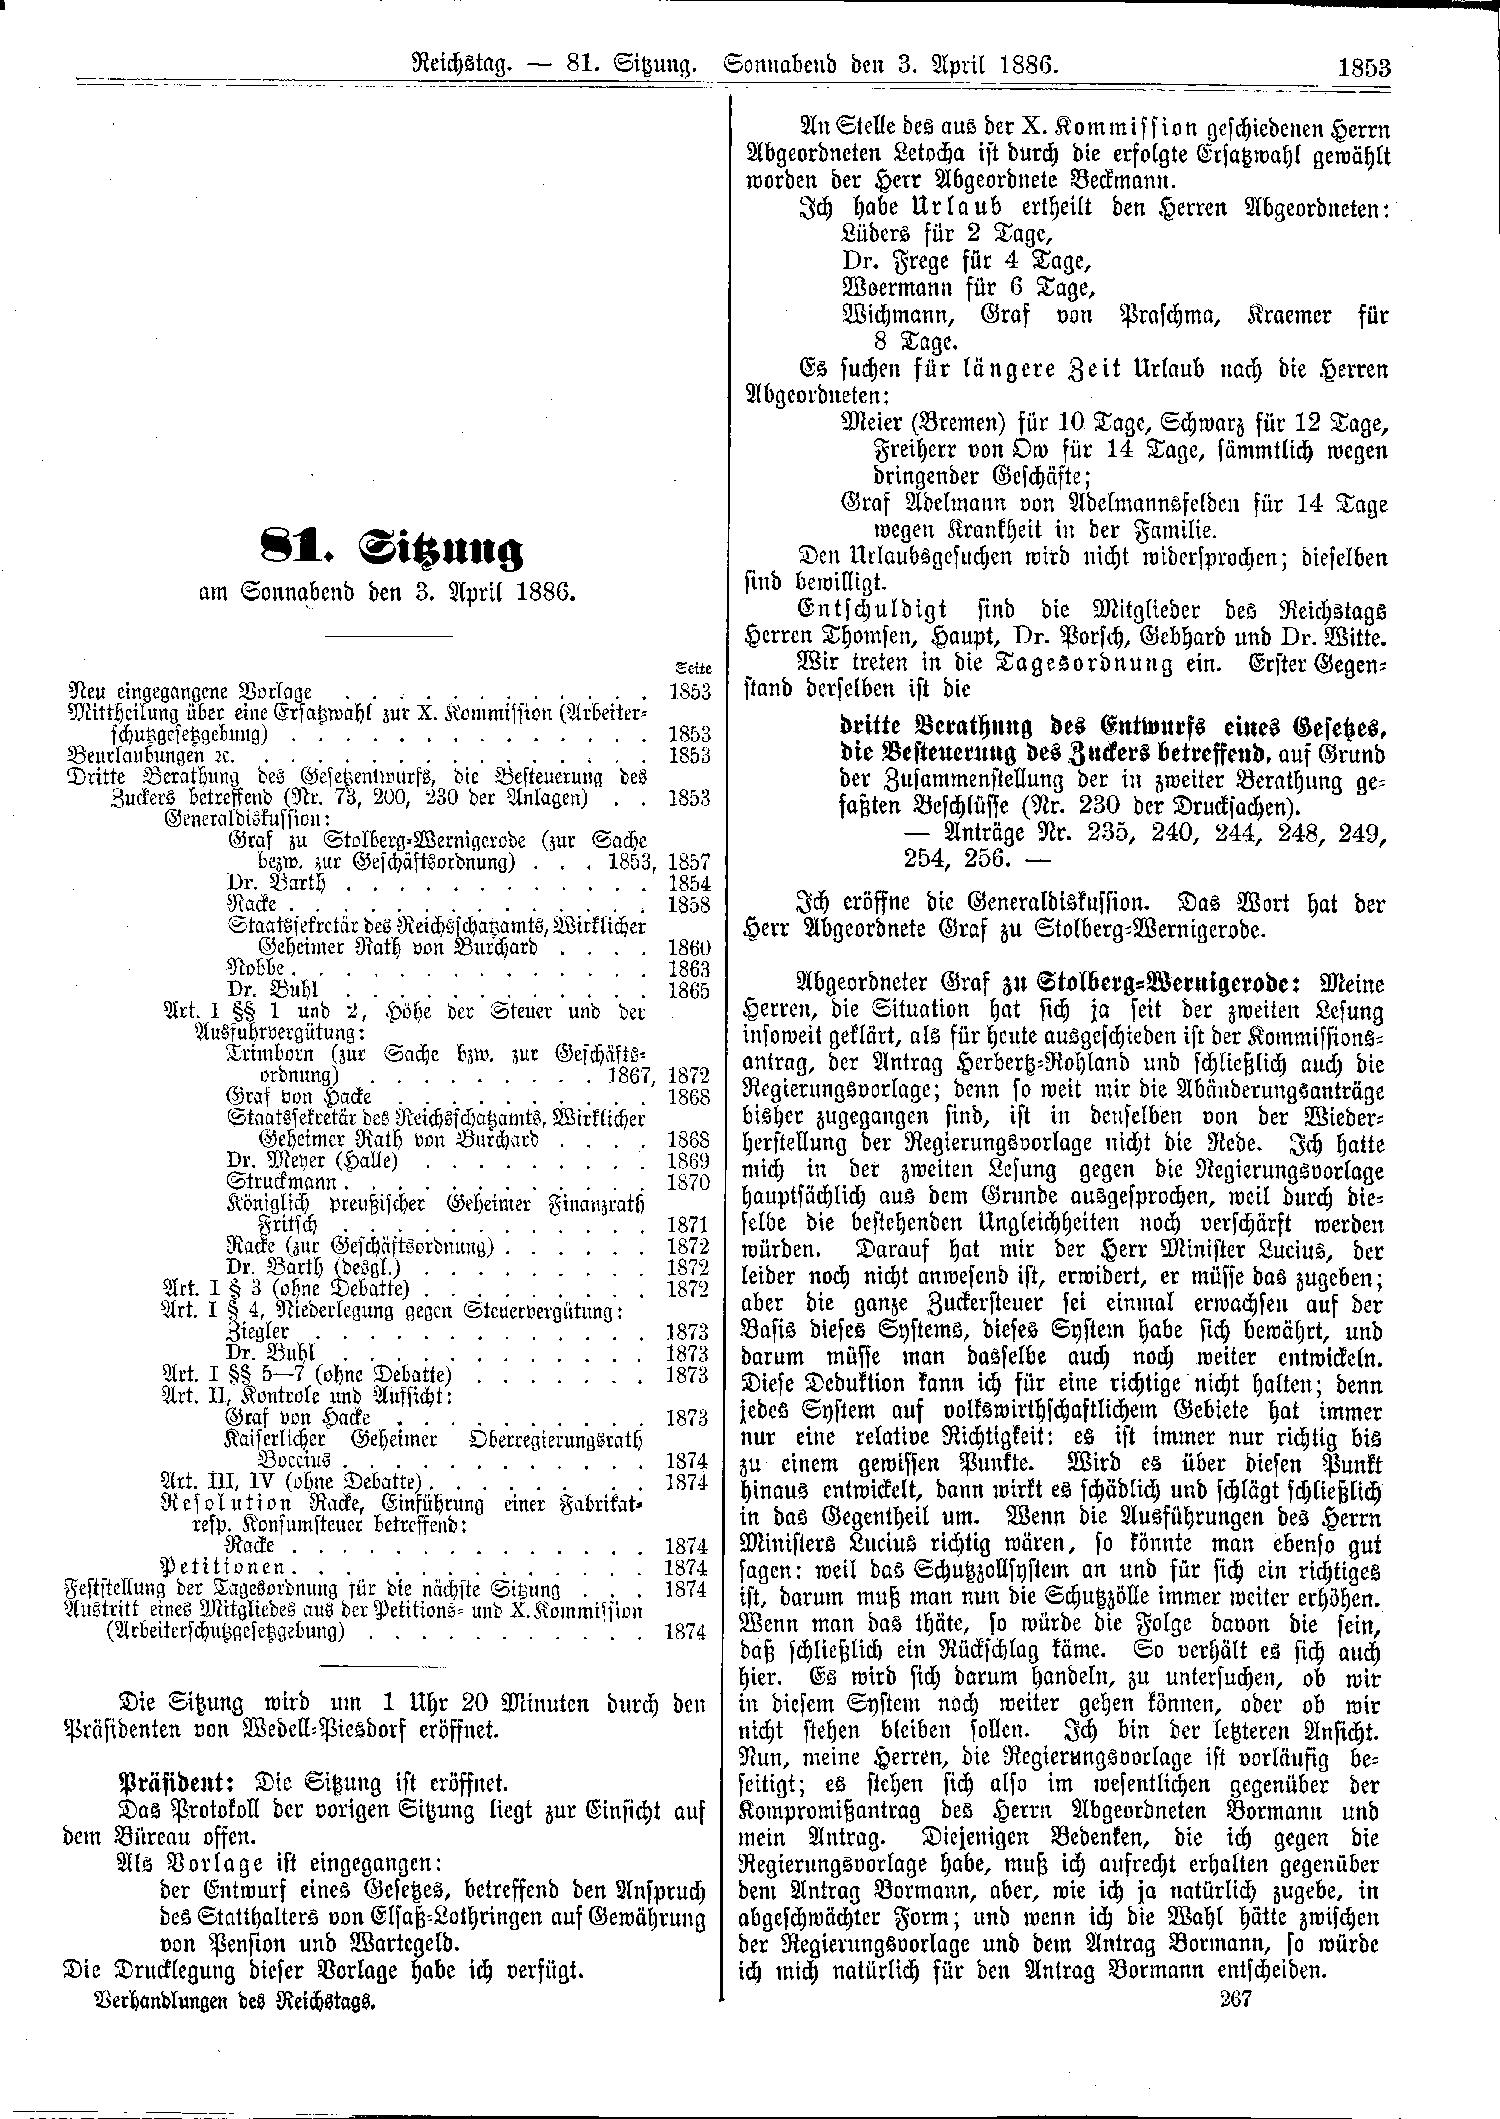 Scan of page 1853